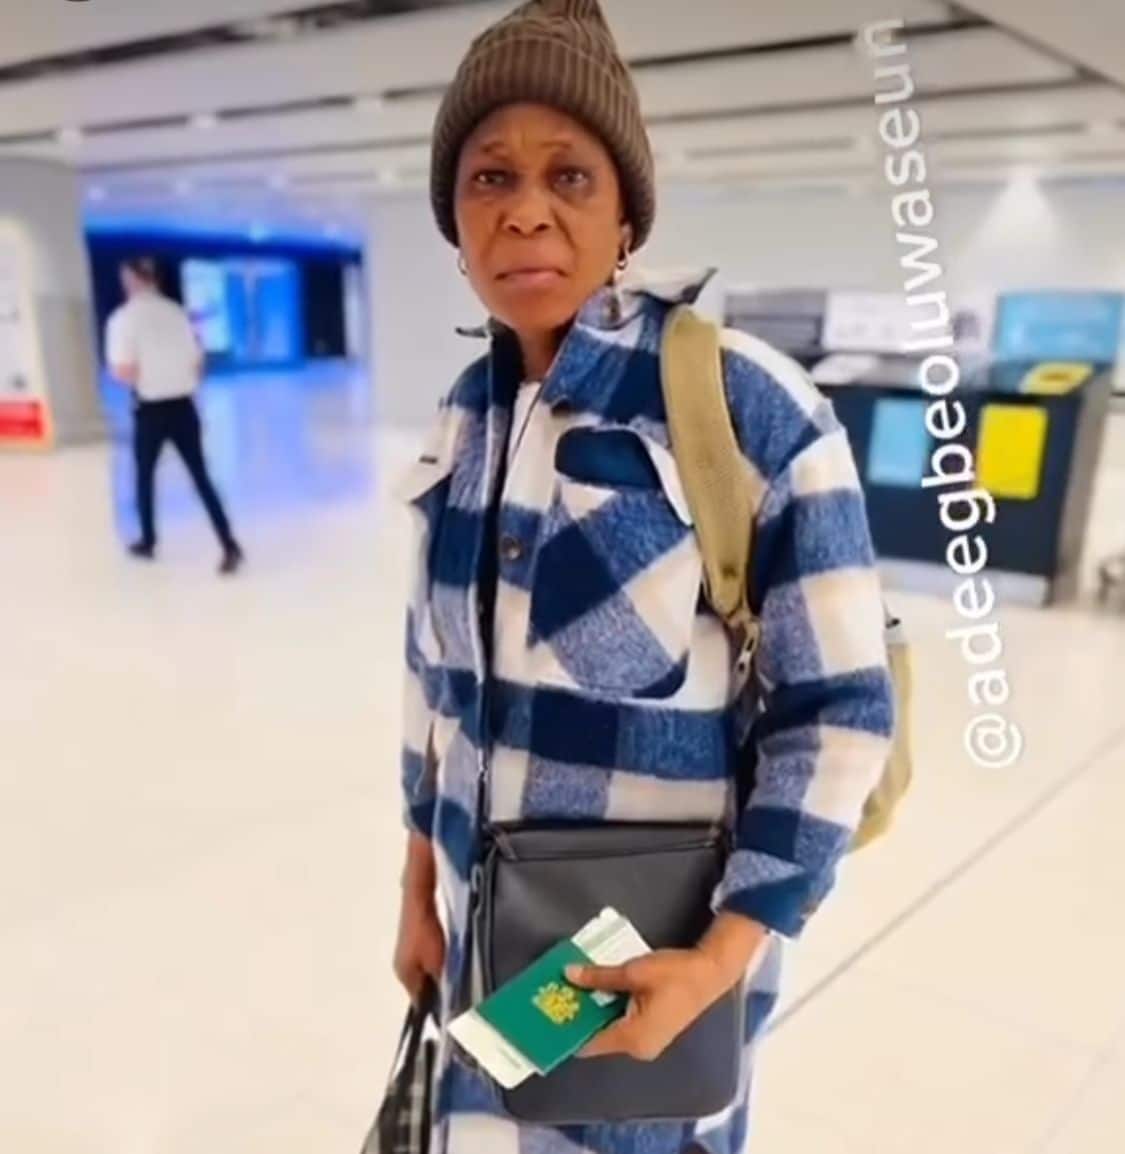 Man shares mother's transformation after relocating to UK (Video)